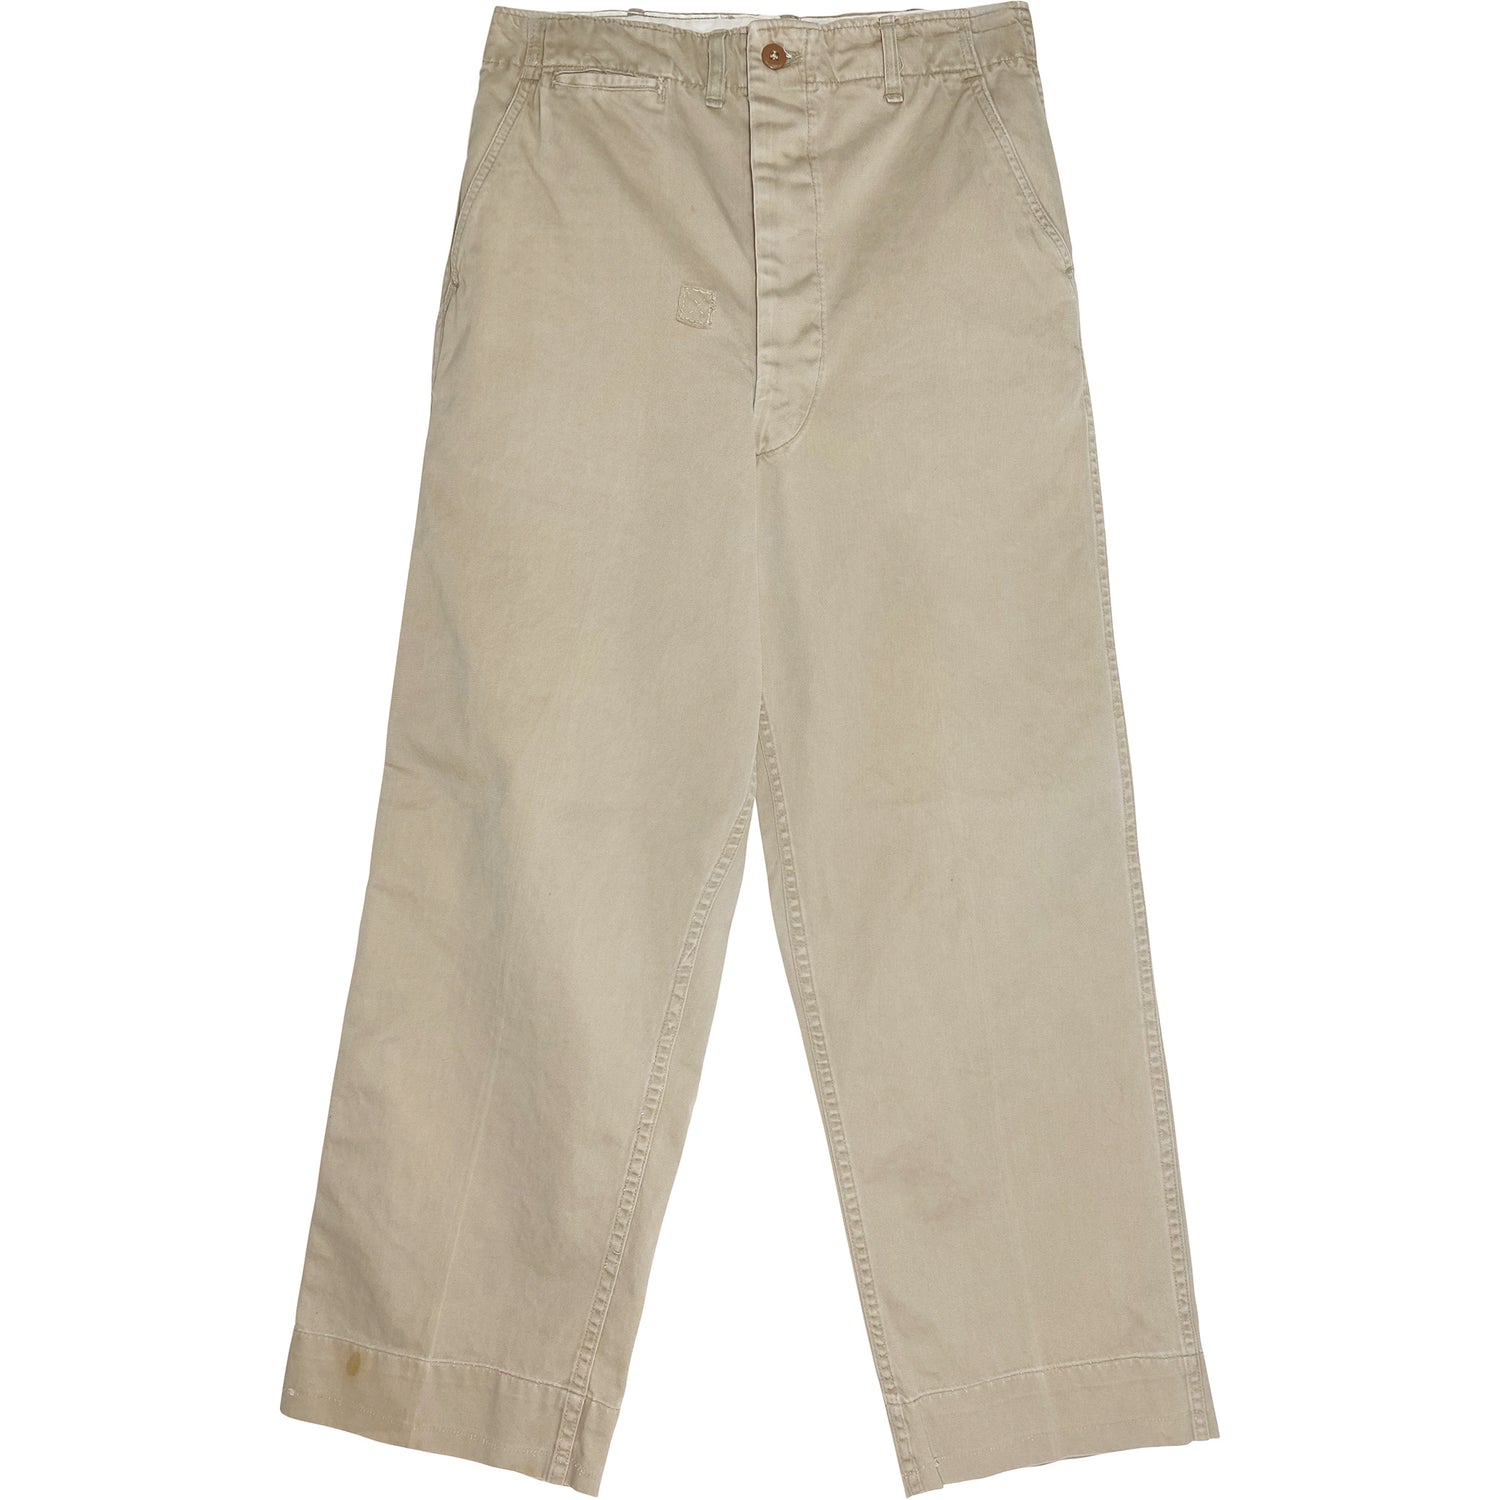 VINTAGE BEAT UP MILITARY CHINOS - Size 28